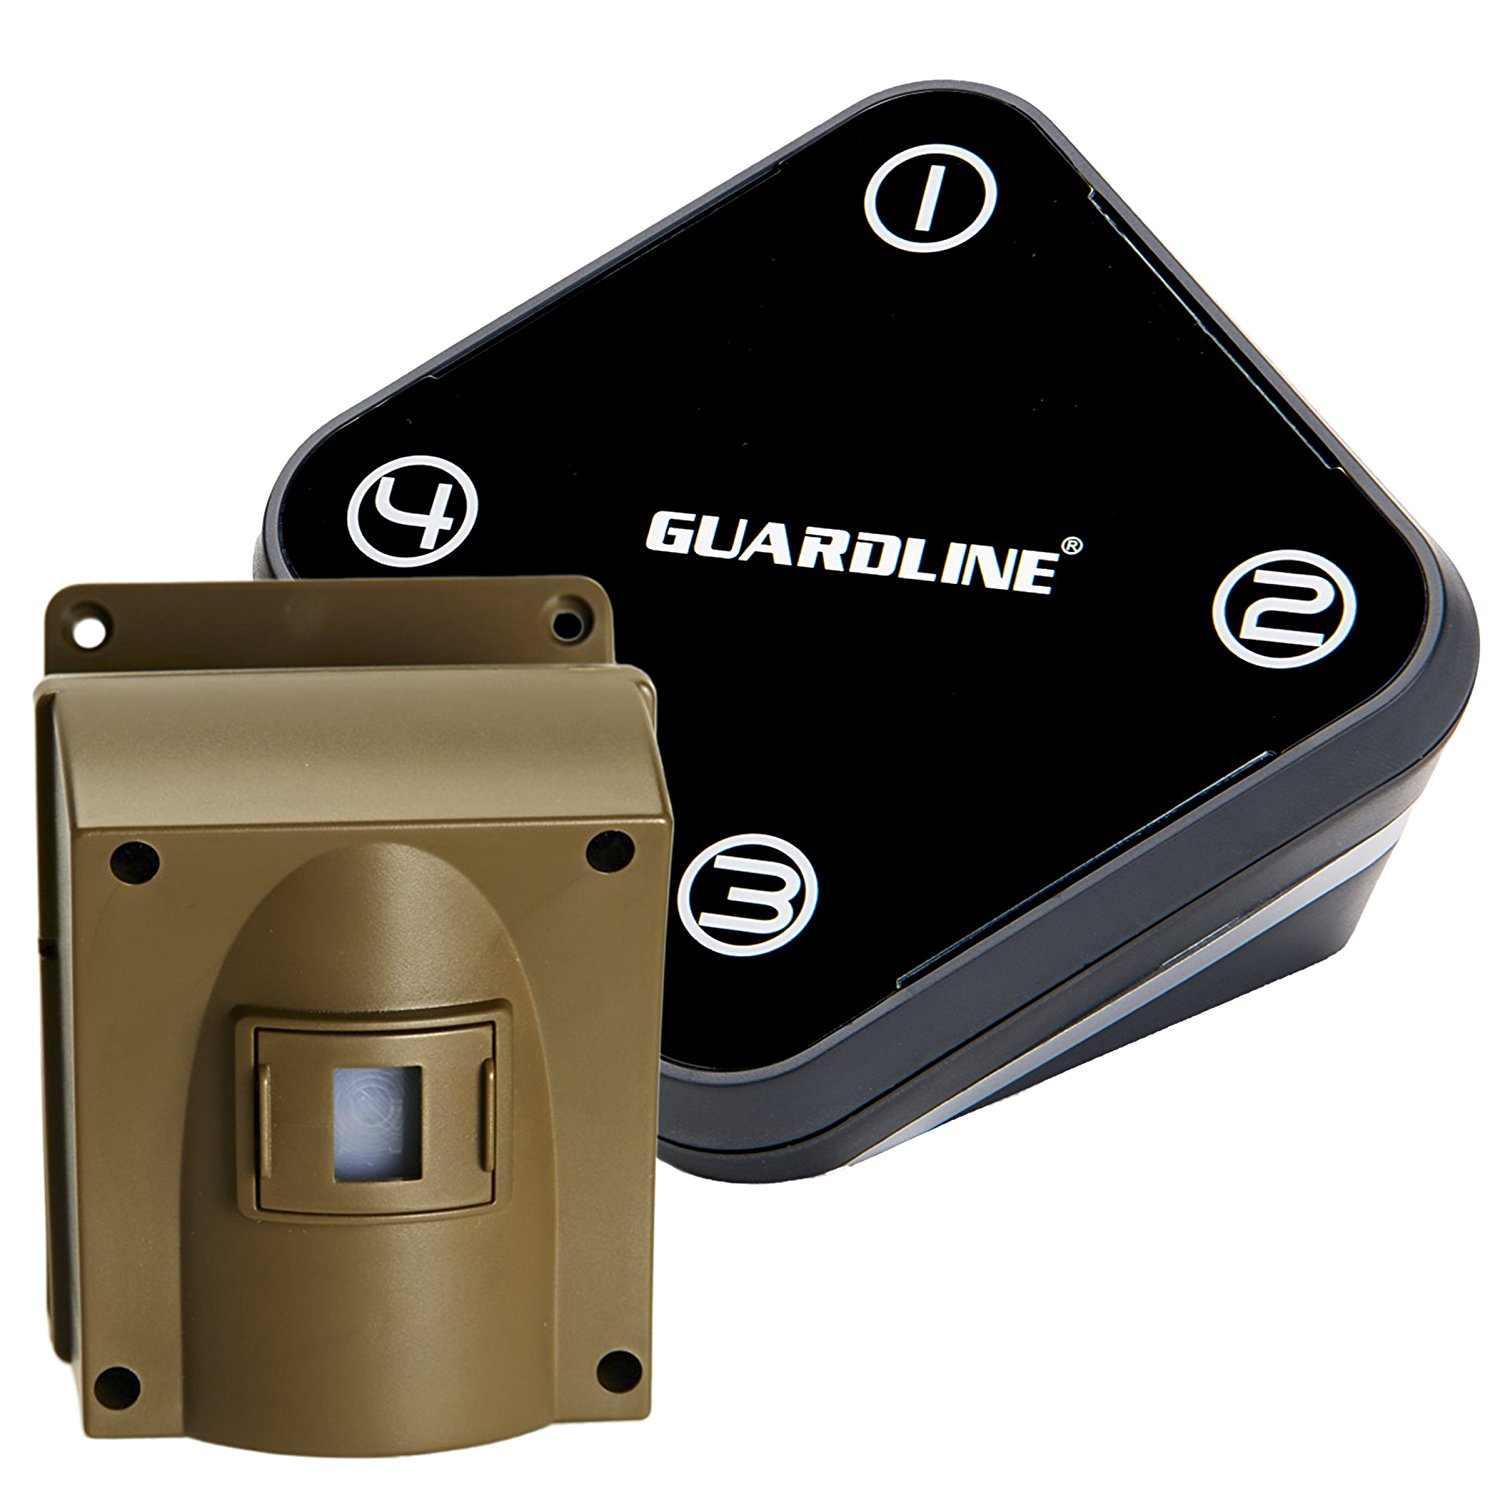 Guardline Wireless Driveway Alarm- Top Rated Outdoor Weatherproof Motion Sensor & Detector- Best DIY Security Alert System- Stay Safe & Protect Home, Outside Property, Yard, Garage, Gate, Pool